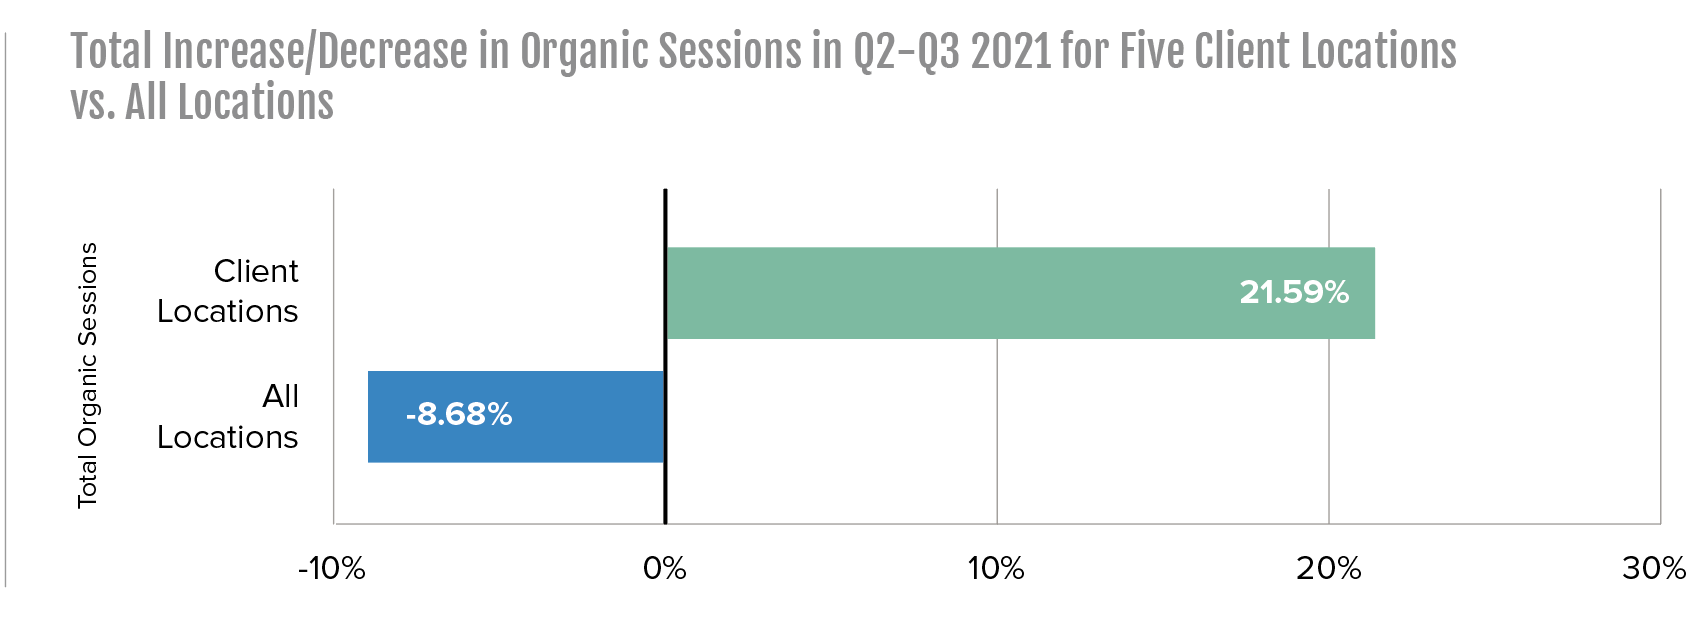 total change in organic sessions in Q2 through Q3 2021 for 5 client locations